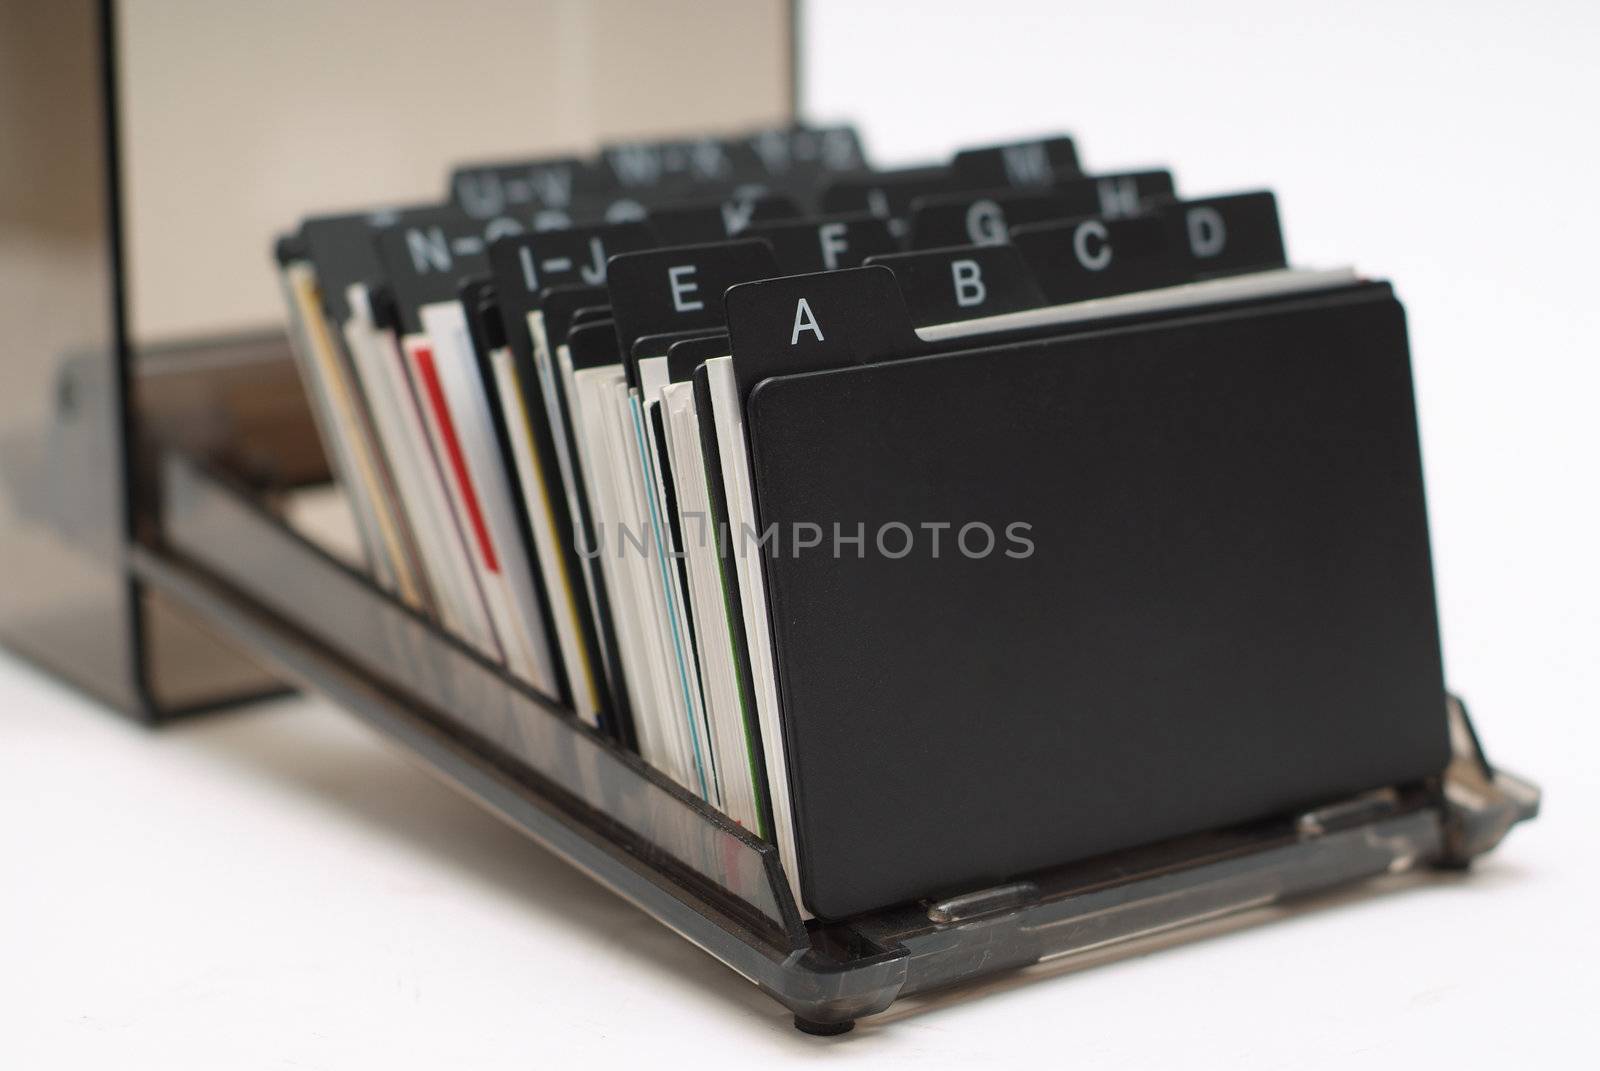 Business card holder focus on A close up